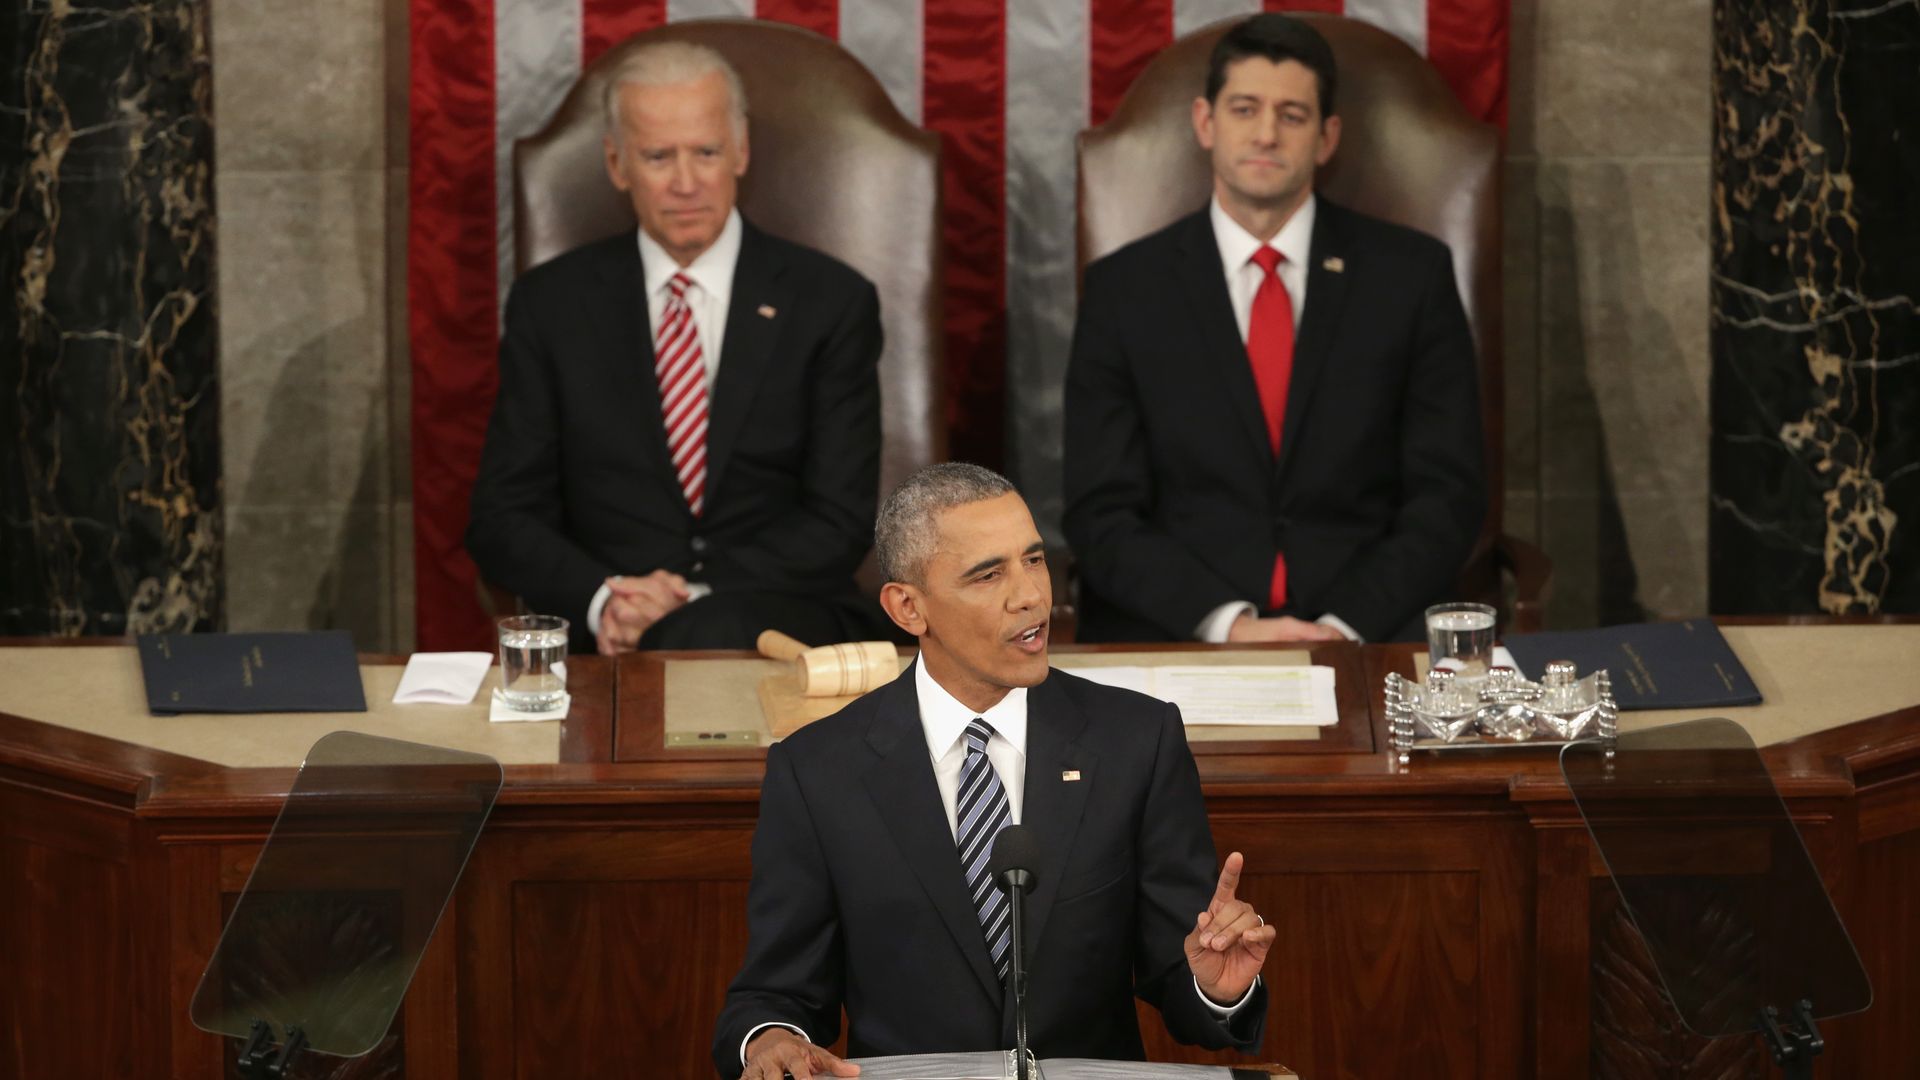 Vice President Joe Biden and House Speaker Paul Ryan are seen listening to President Obama as he delivers his final State of the Union address in January 2016.